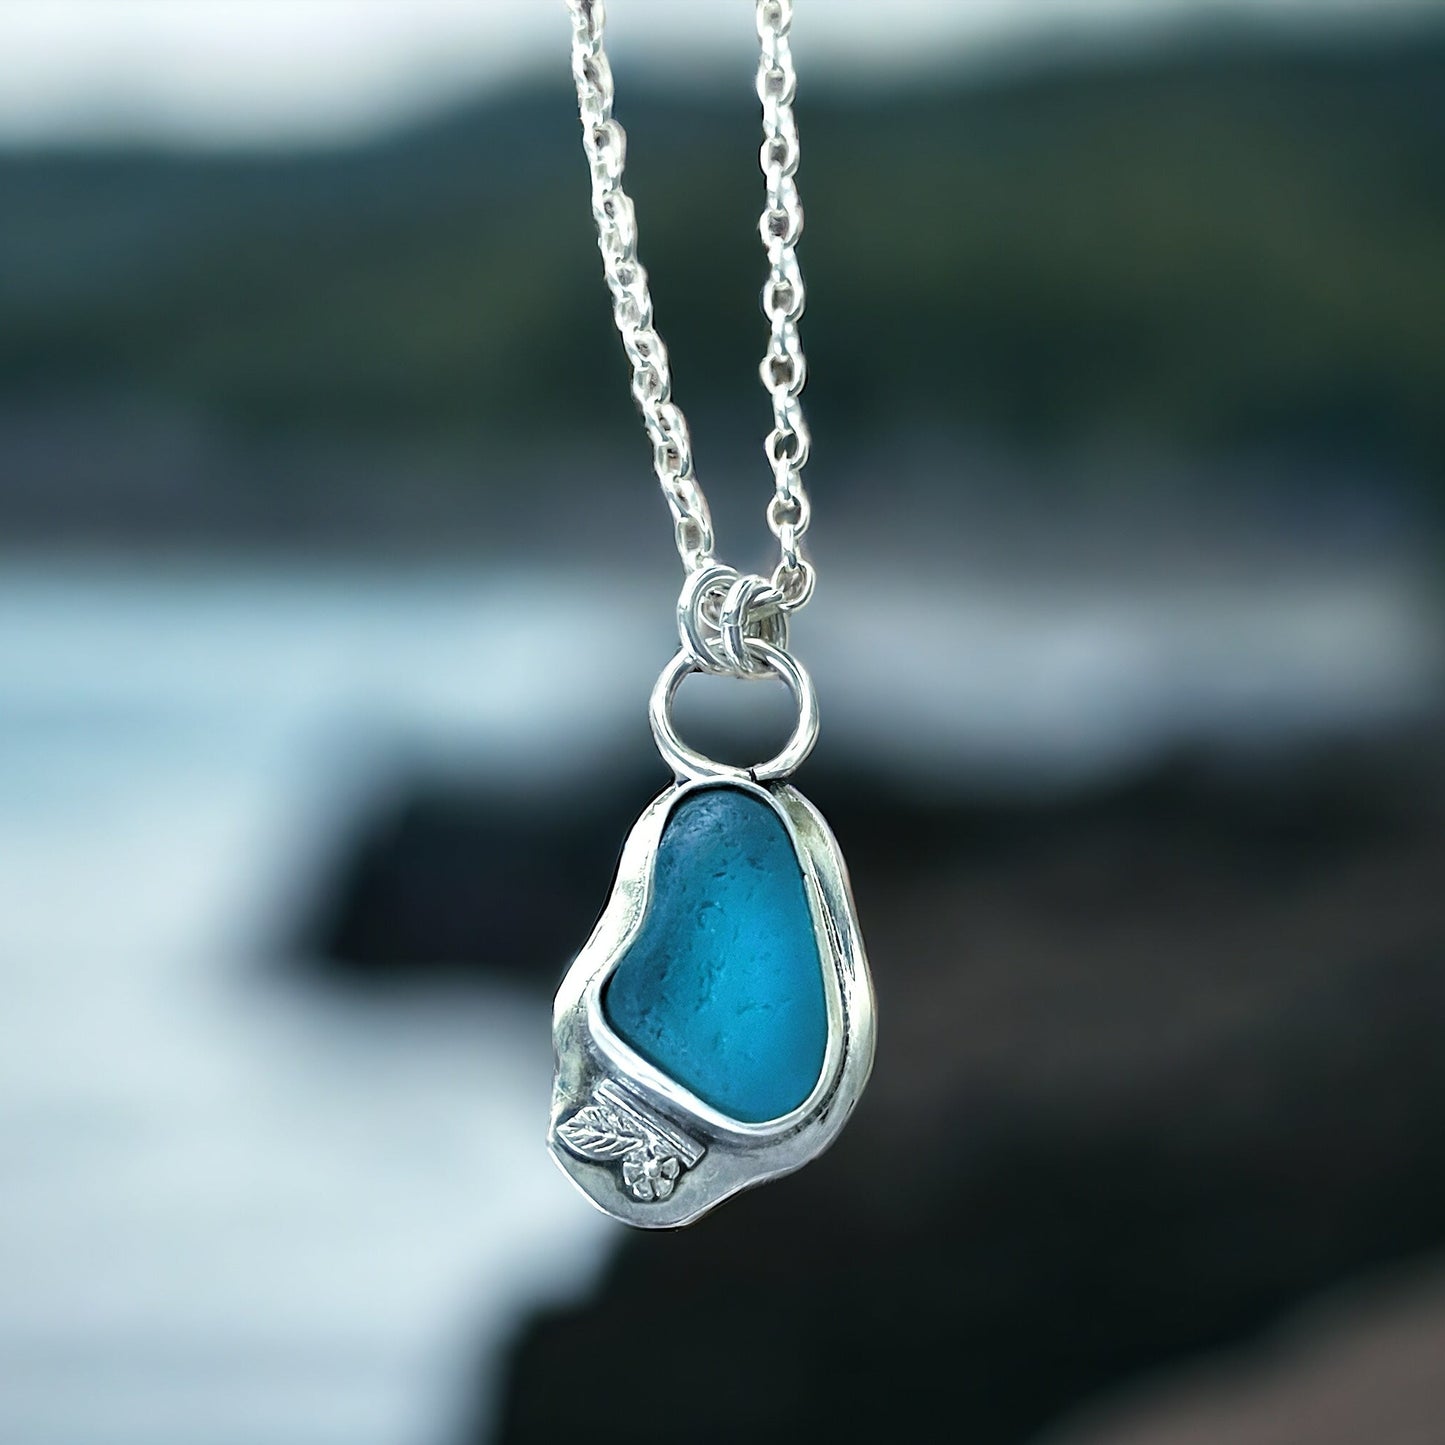 Teal Seaglass Necklace with leaf embillishment in Sterling Silver